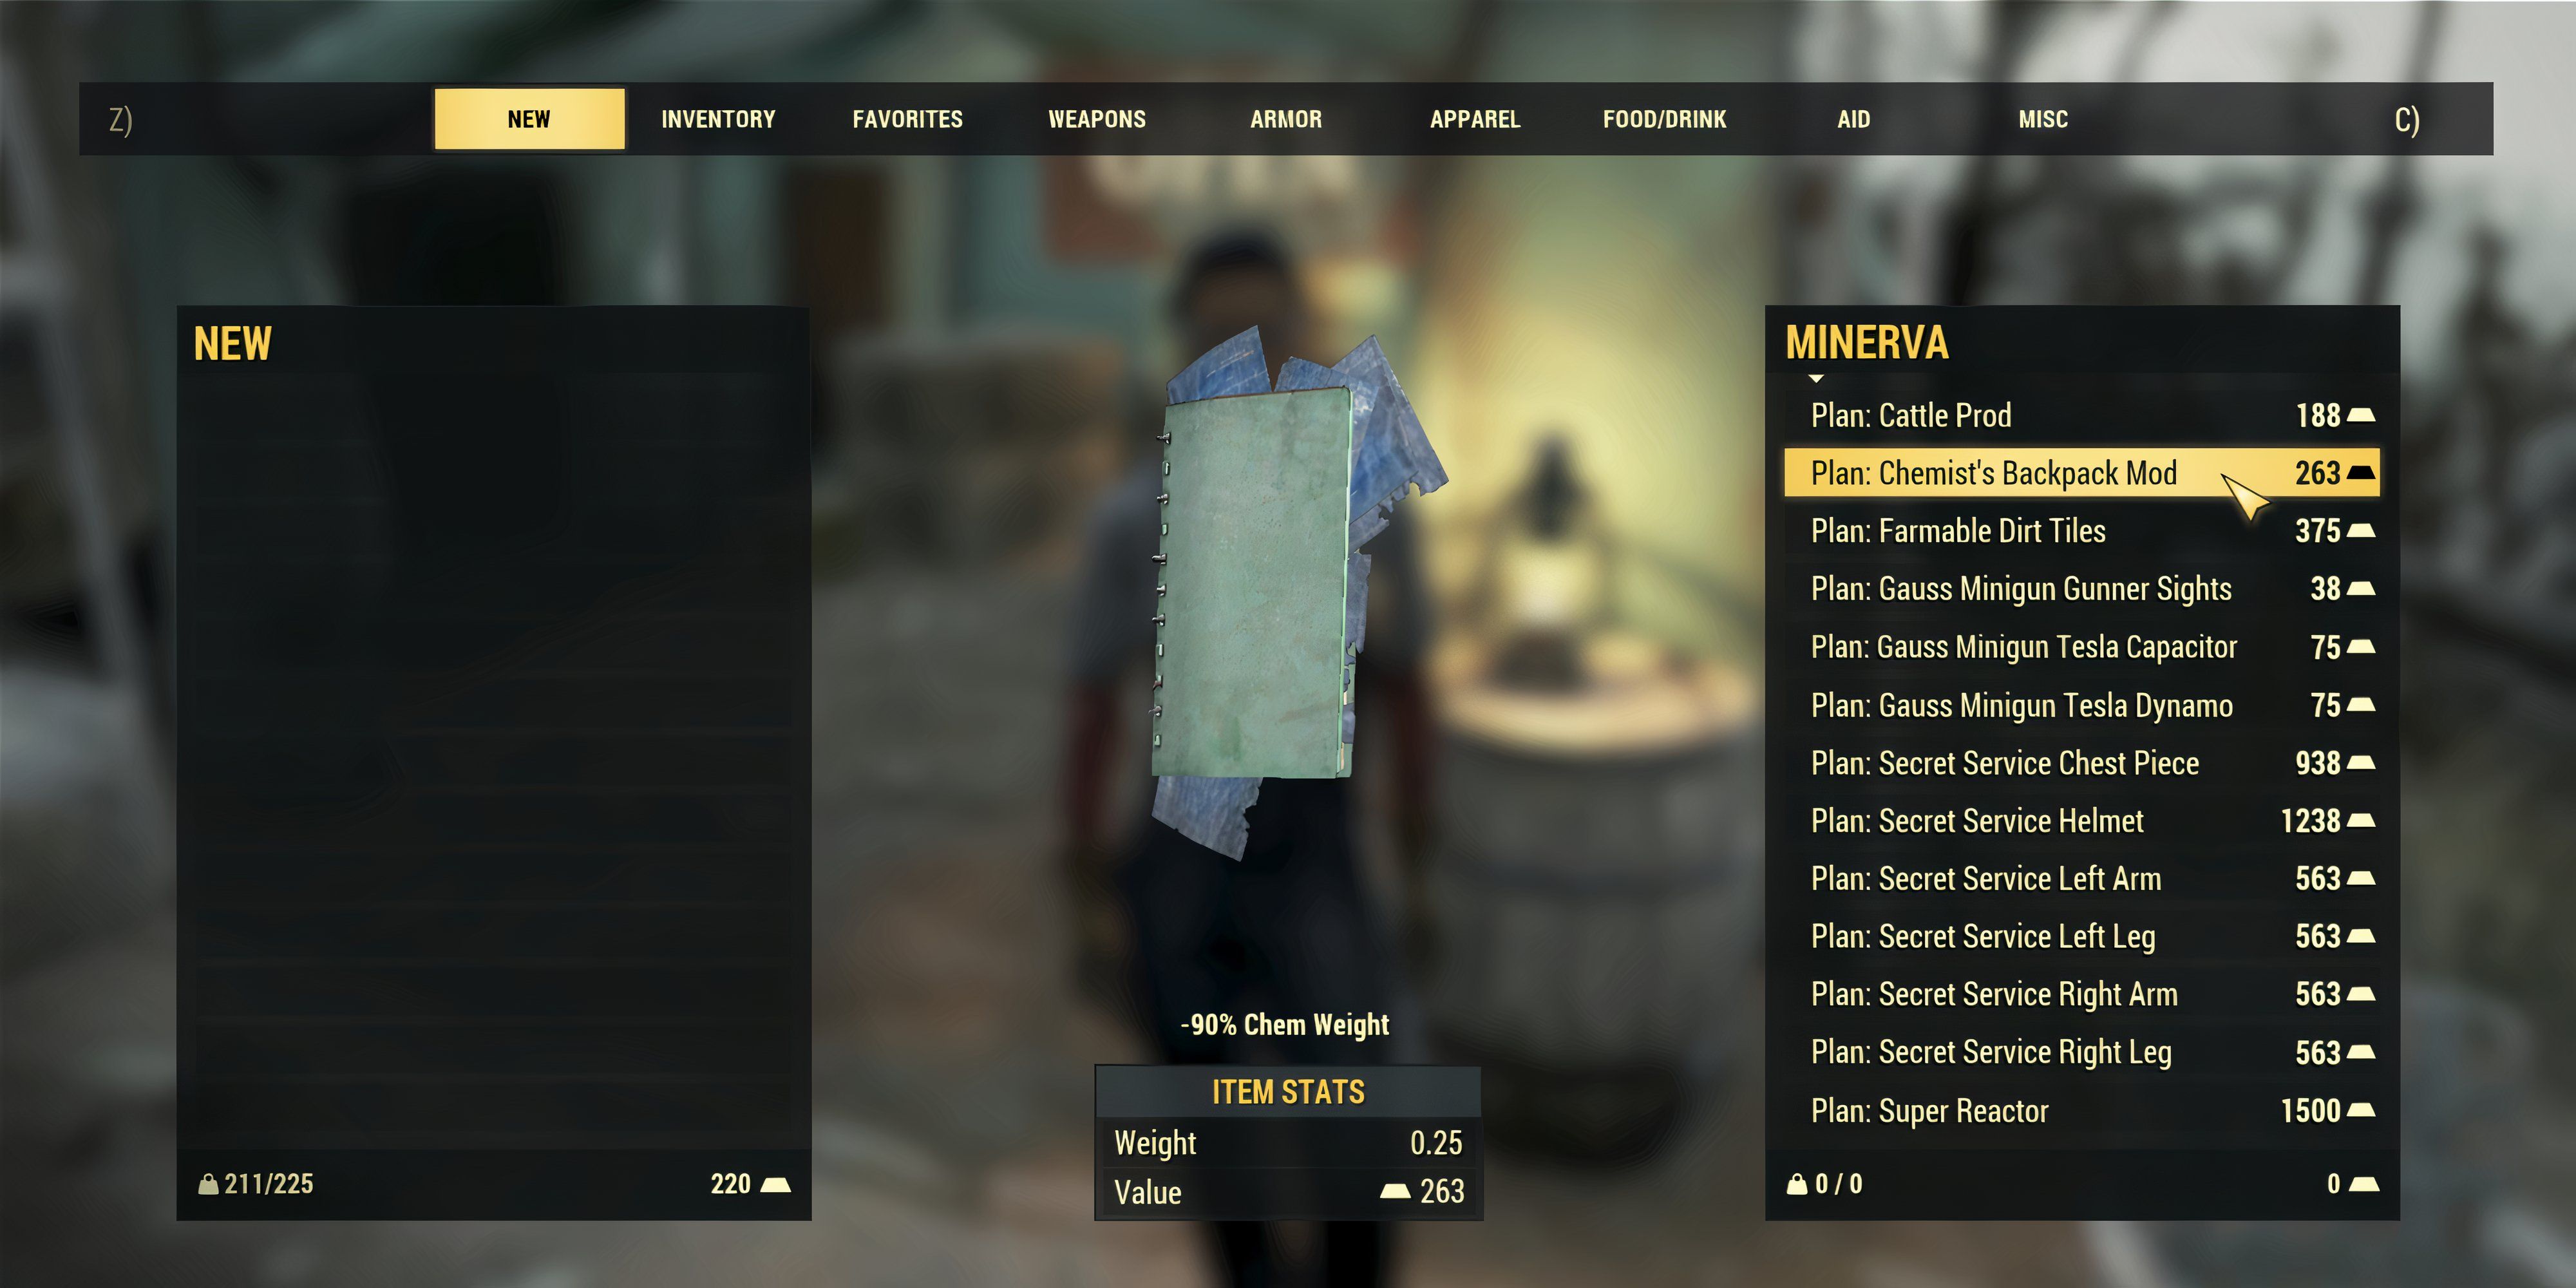 Buying the Chemist Backpack Mod from Minerva in Fallout 76